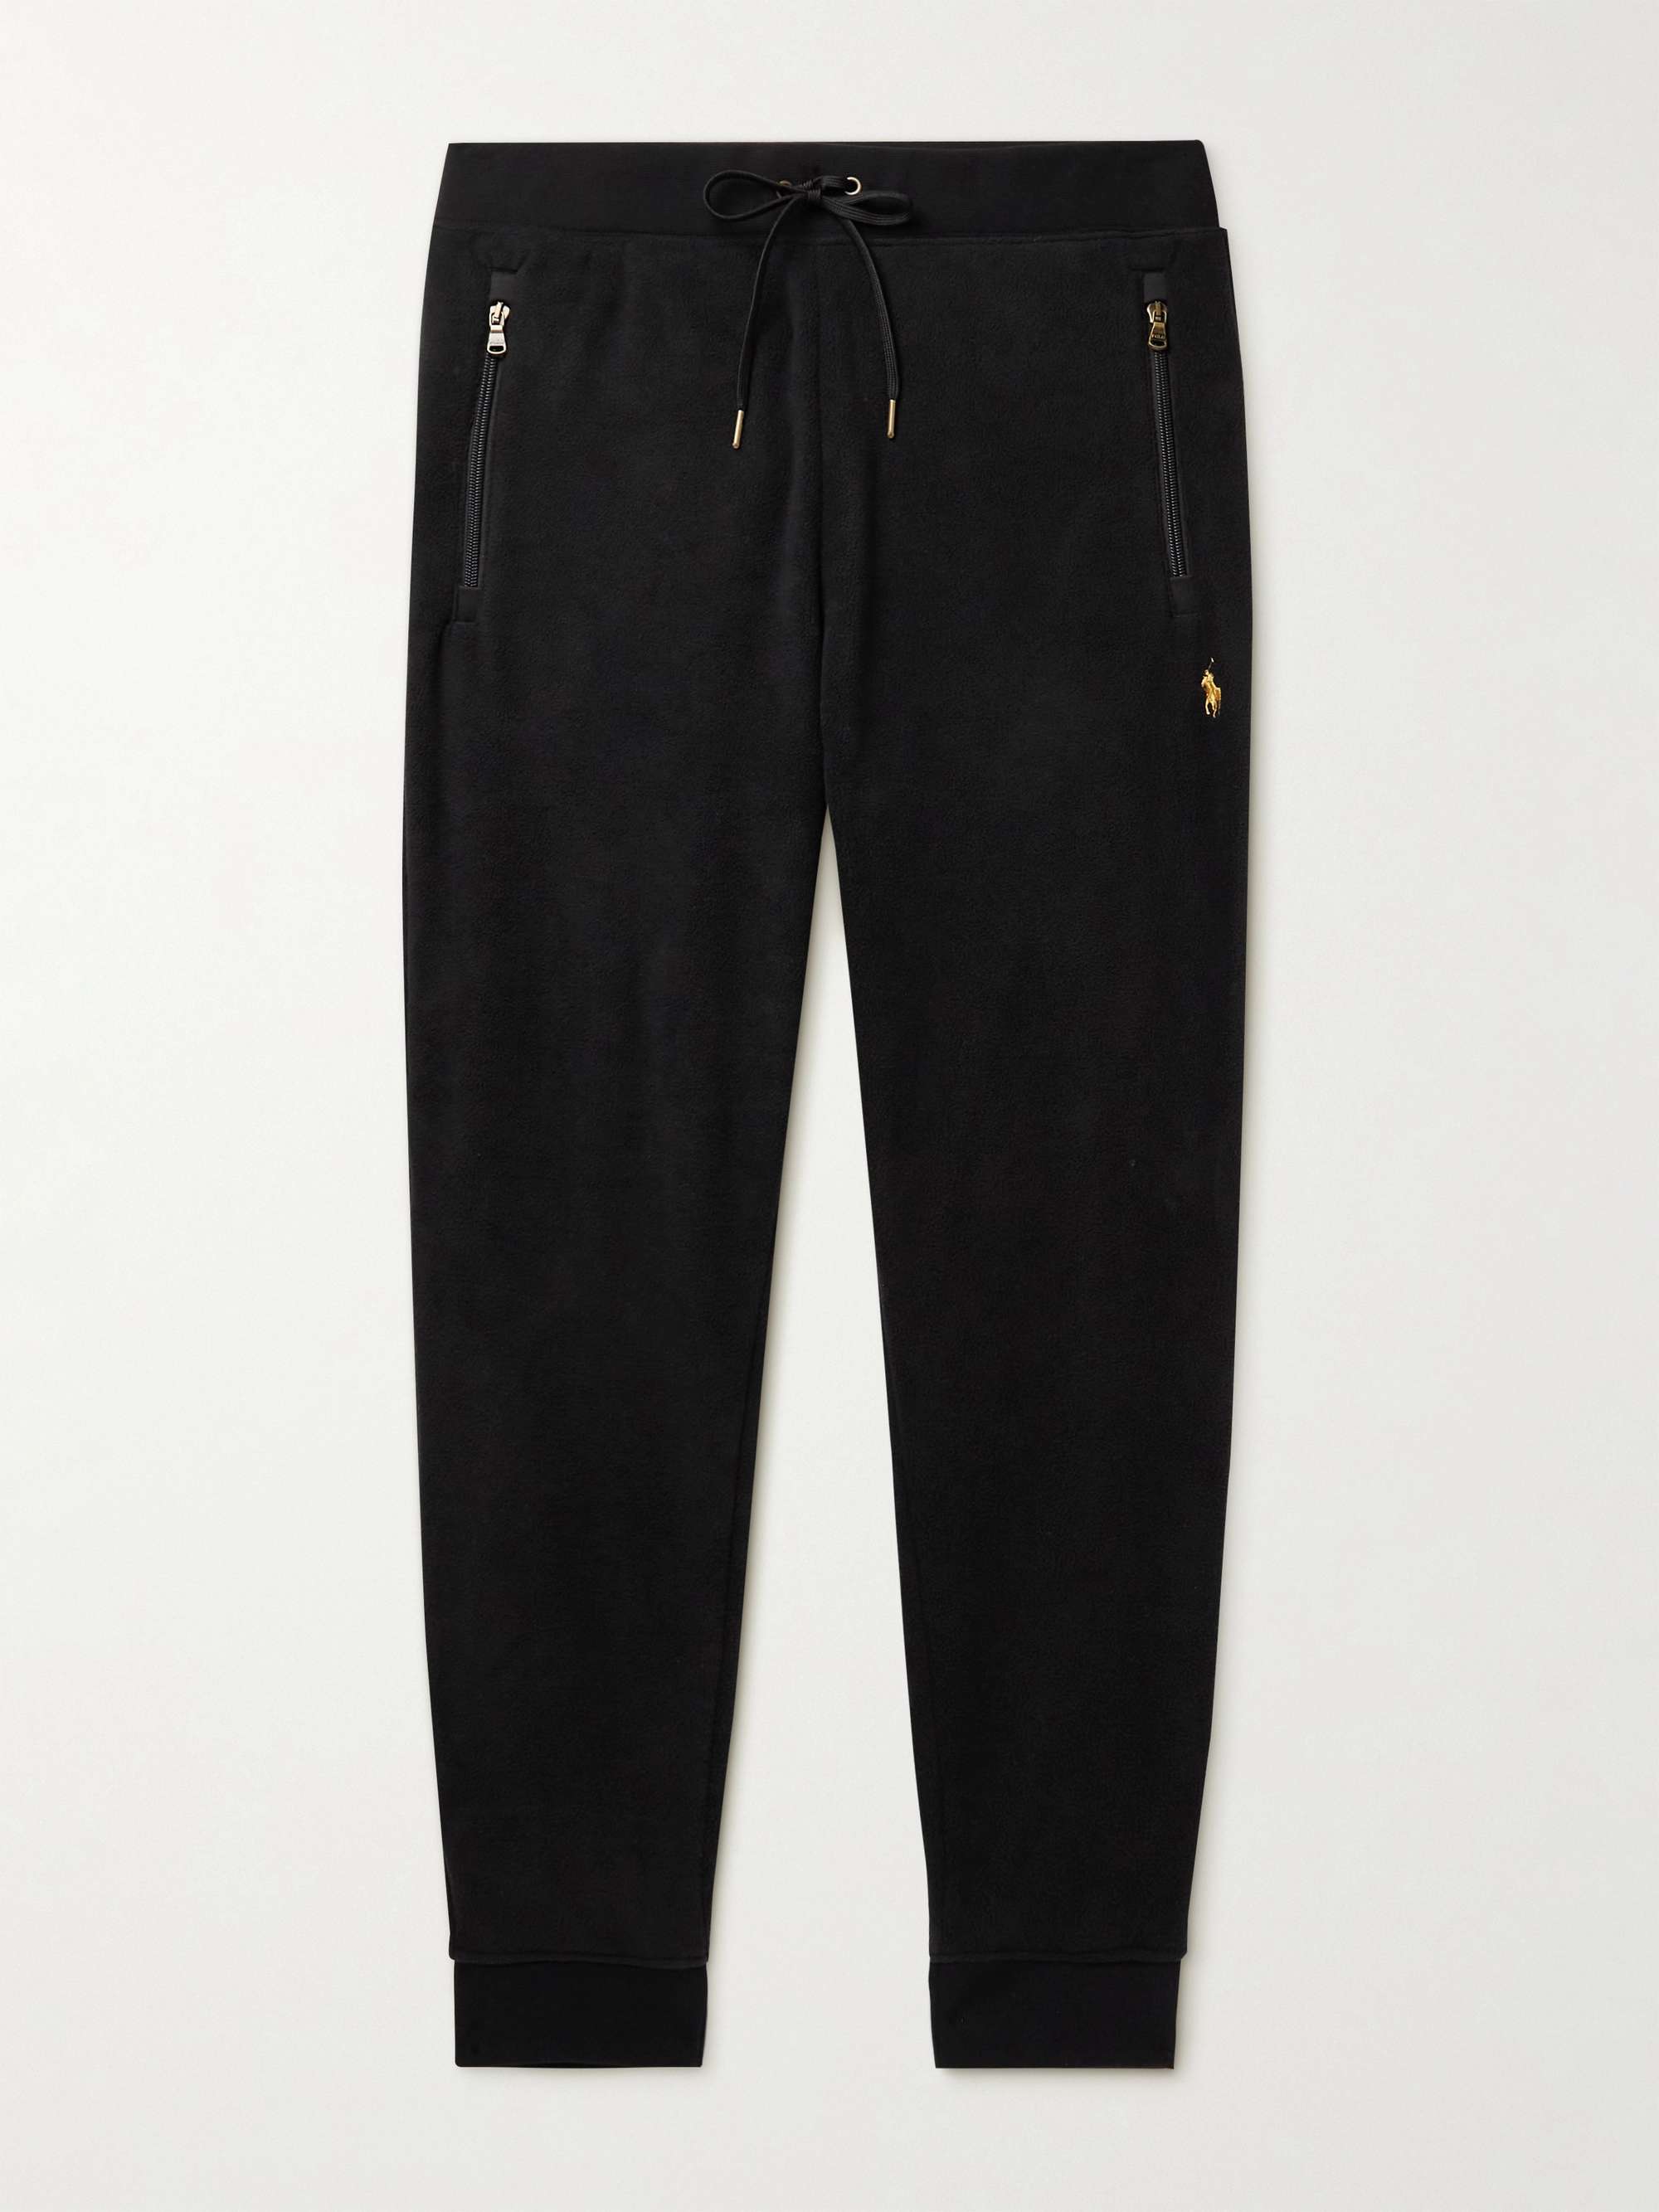 POLO RALPH LAUREN Tapered Recycled Fleece Track Pants,Black